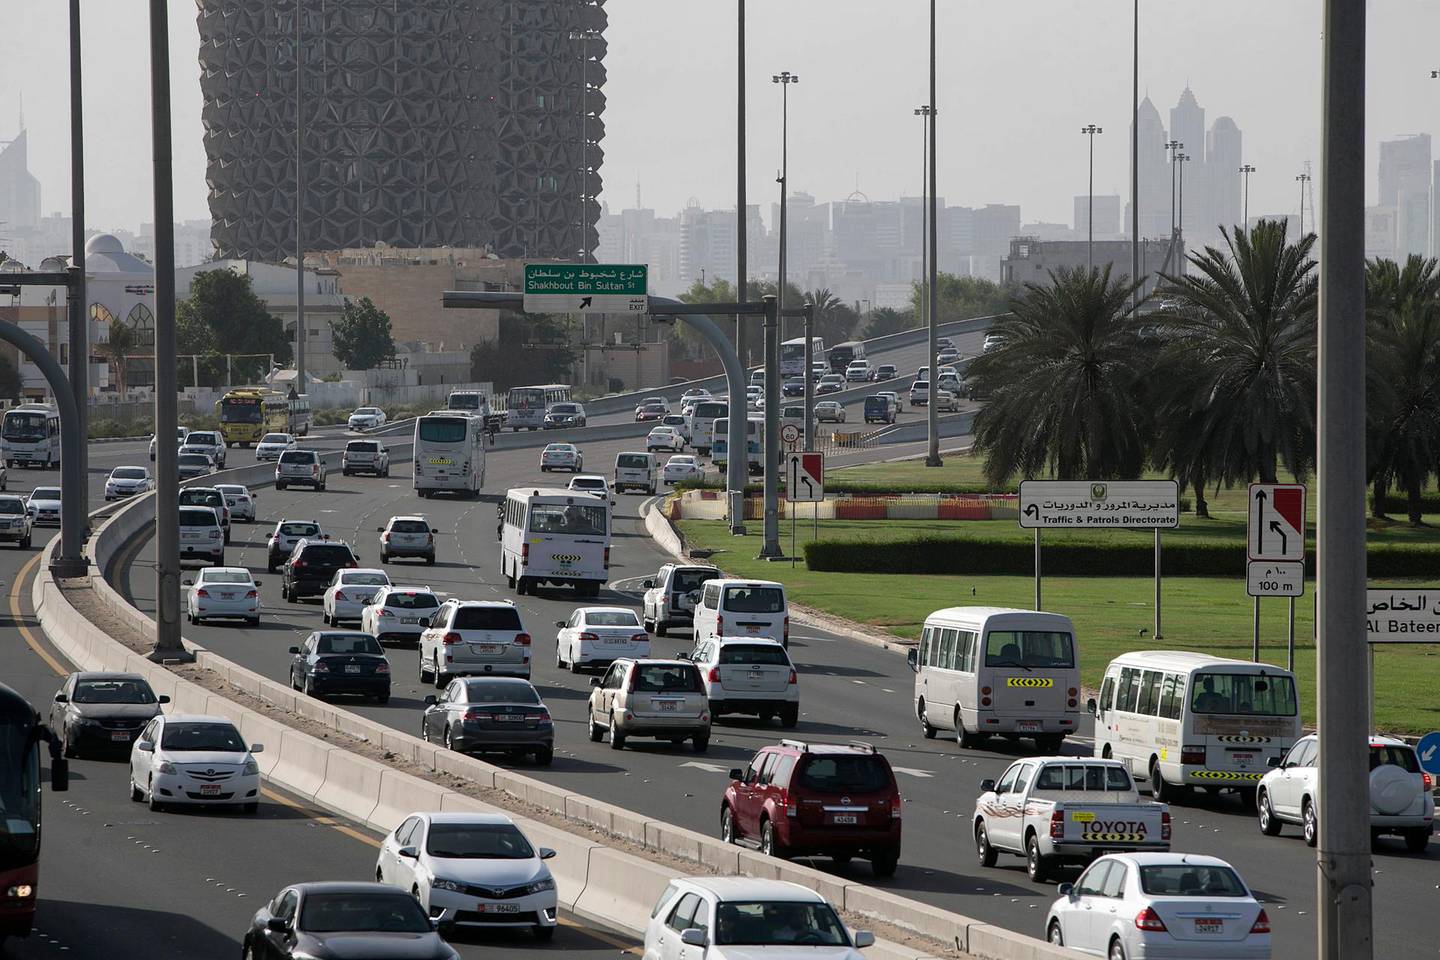 ABU DHABI, UNITED ARAB EMIRATES, May 13, 2015:  
Cars flow in thickening traffic on Sheikh Zayed road in Abu Dhabi during the beginning of rush hour on Wednesday, May 13, 2015. A recent yougov survey-it says commute times in Abu Dhabi are down, and drivers are happier, but the roads still have a lot of inattentive drivers. (Silvia Razgova / The National)  (Usage: May 13, 2015, Section: NA, Reporter: ) *** Local Caption ***  SR-150513-traffic19.jpg